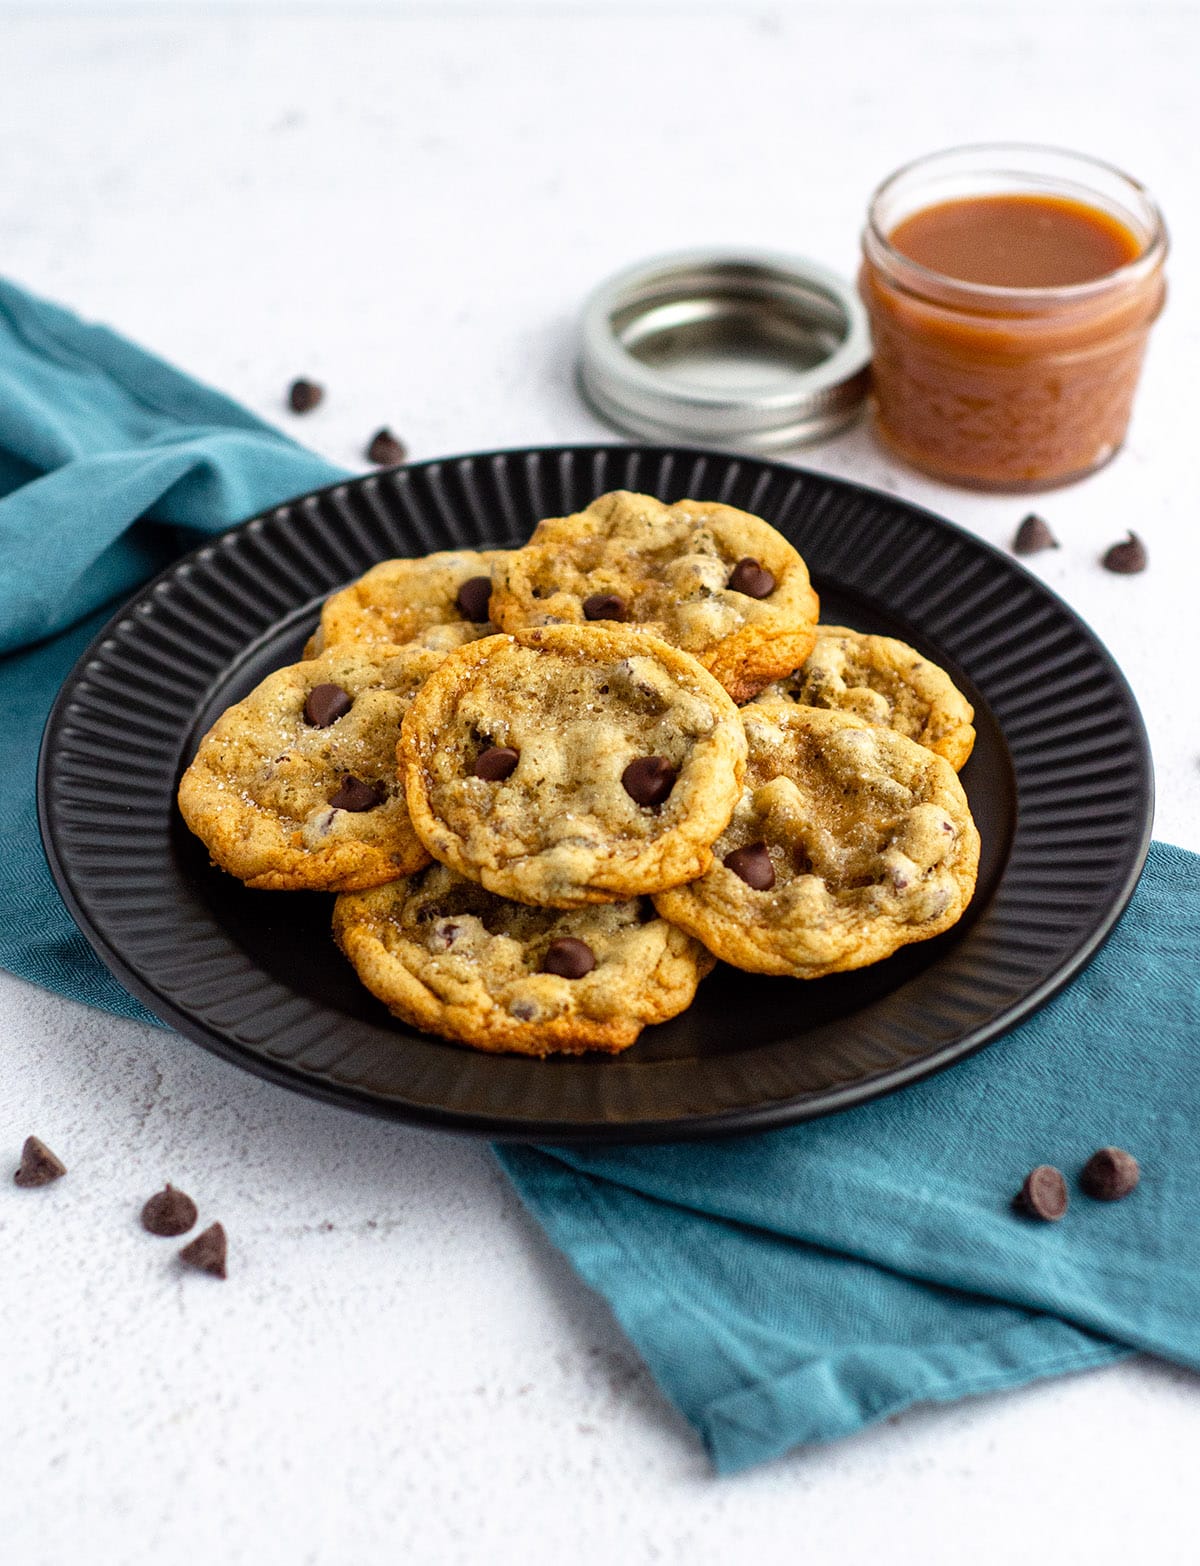 Salted Caramel Chocolate Chip Cookies: Easy drop cookies filled with chocolate chips and swirled with salted caramel sauce. No chilling required!